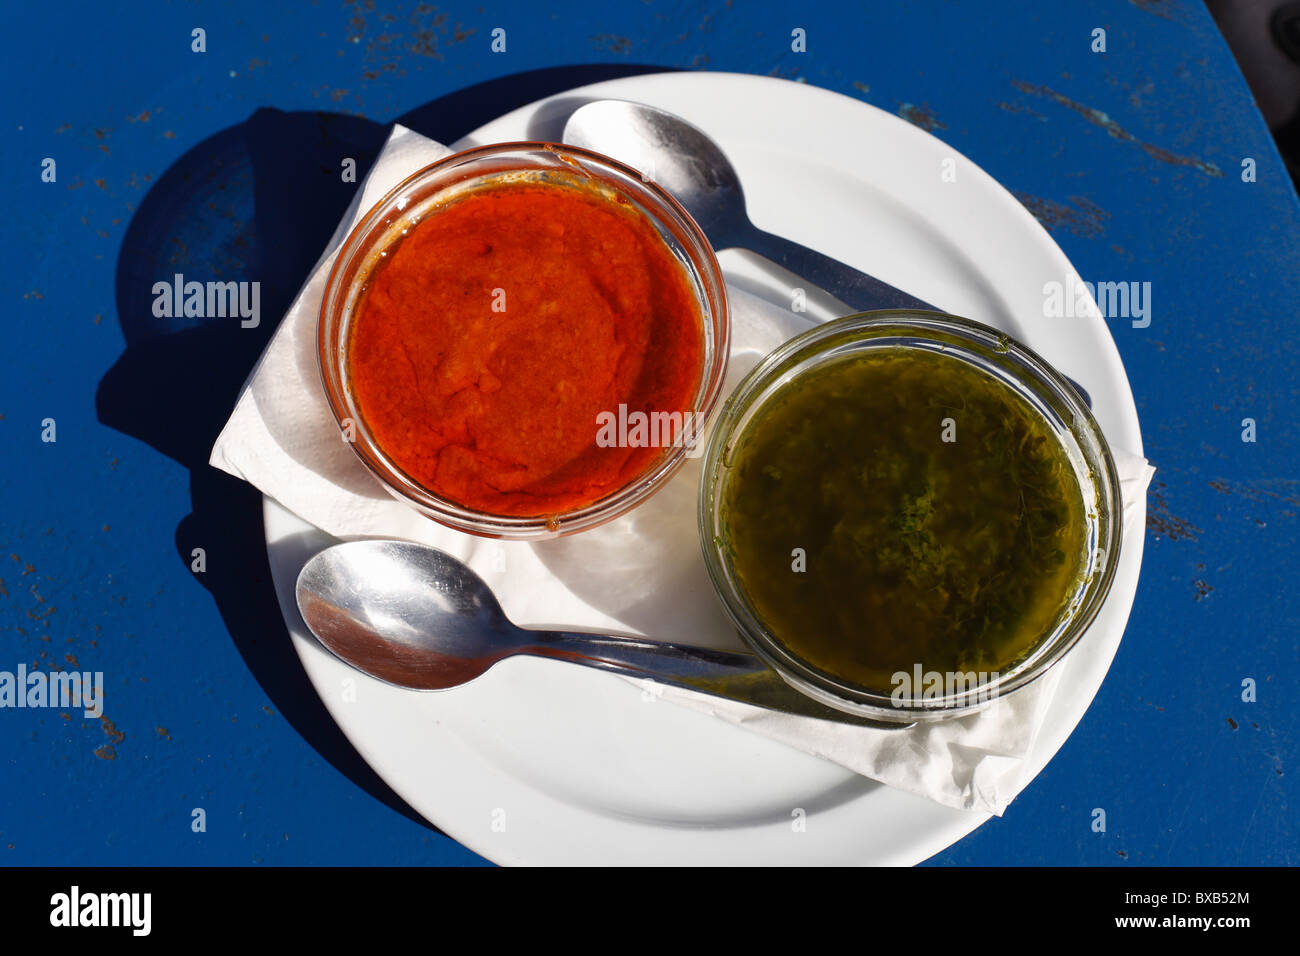 Mojo rojo and mojo verde, red and green sauces, Lanzarote, Canary Islands, Spain, Europe Stock Photo